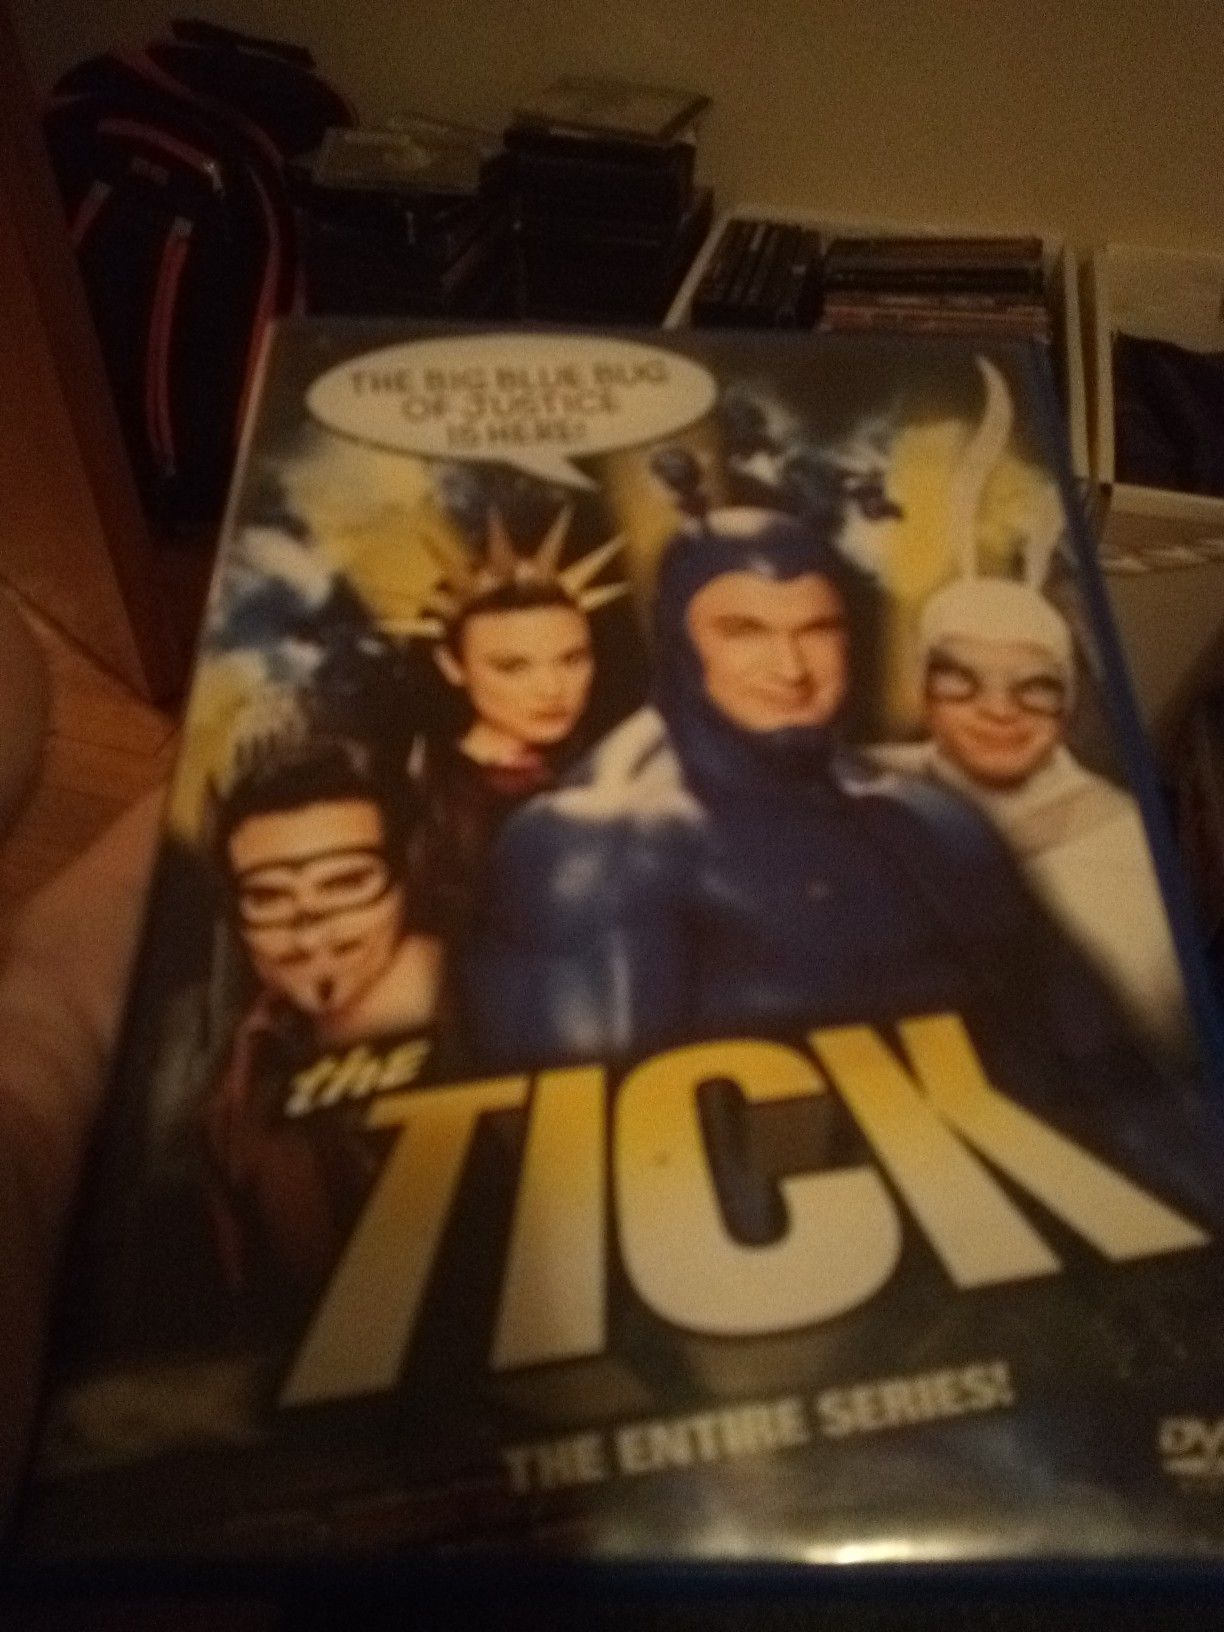 The Tick Complete Series